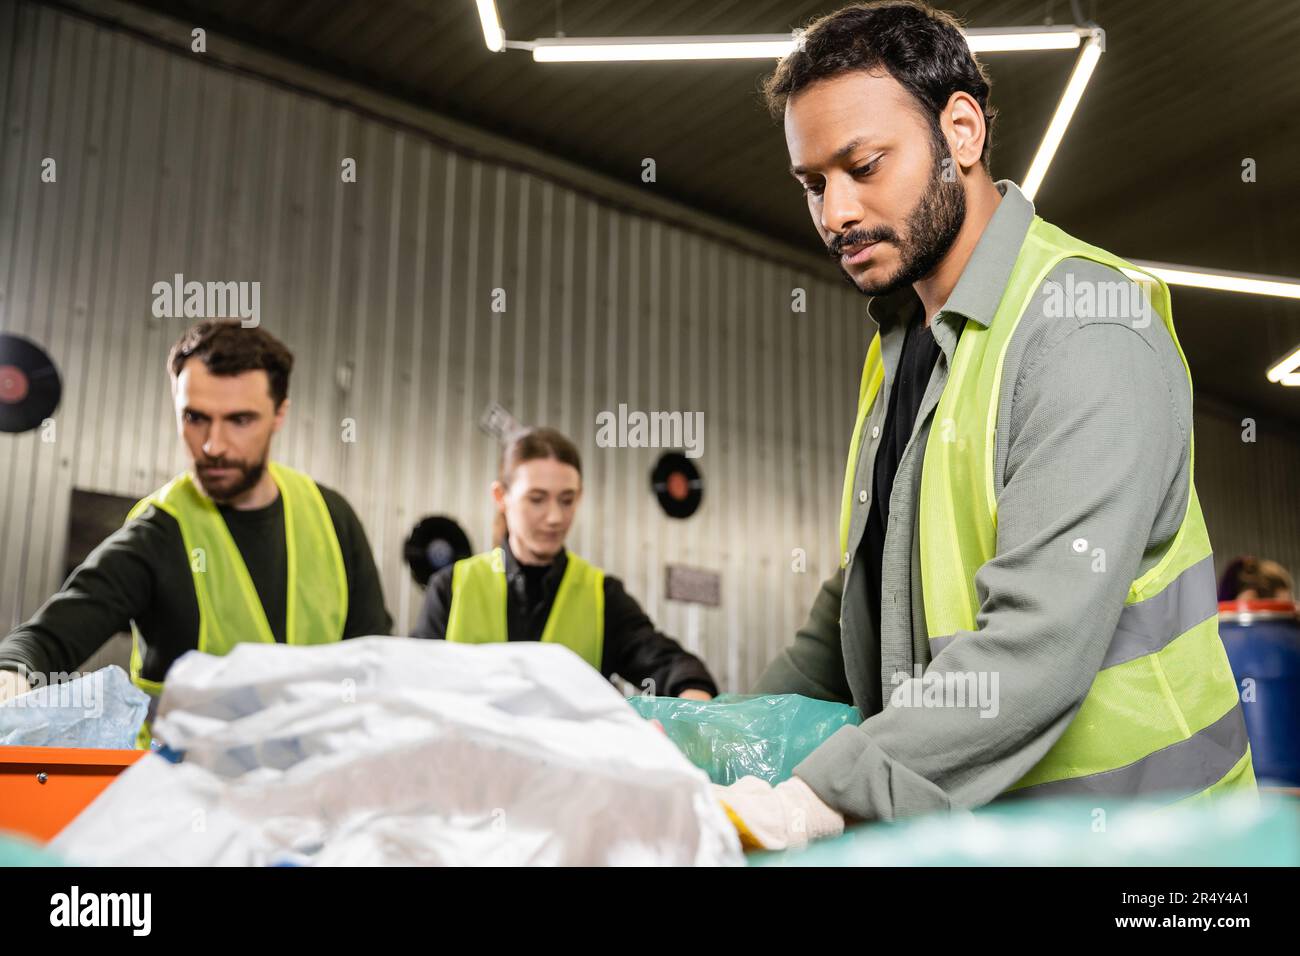 Indian worker in glove and protective uniform standing near plastic bag while separating trash near blurred conveyor and colleagues at background in w Stock Photo